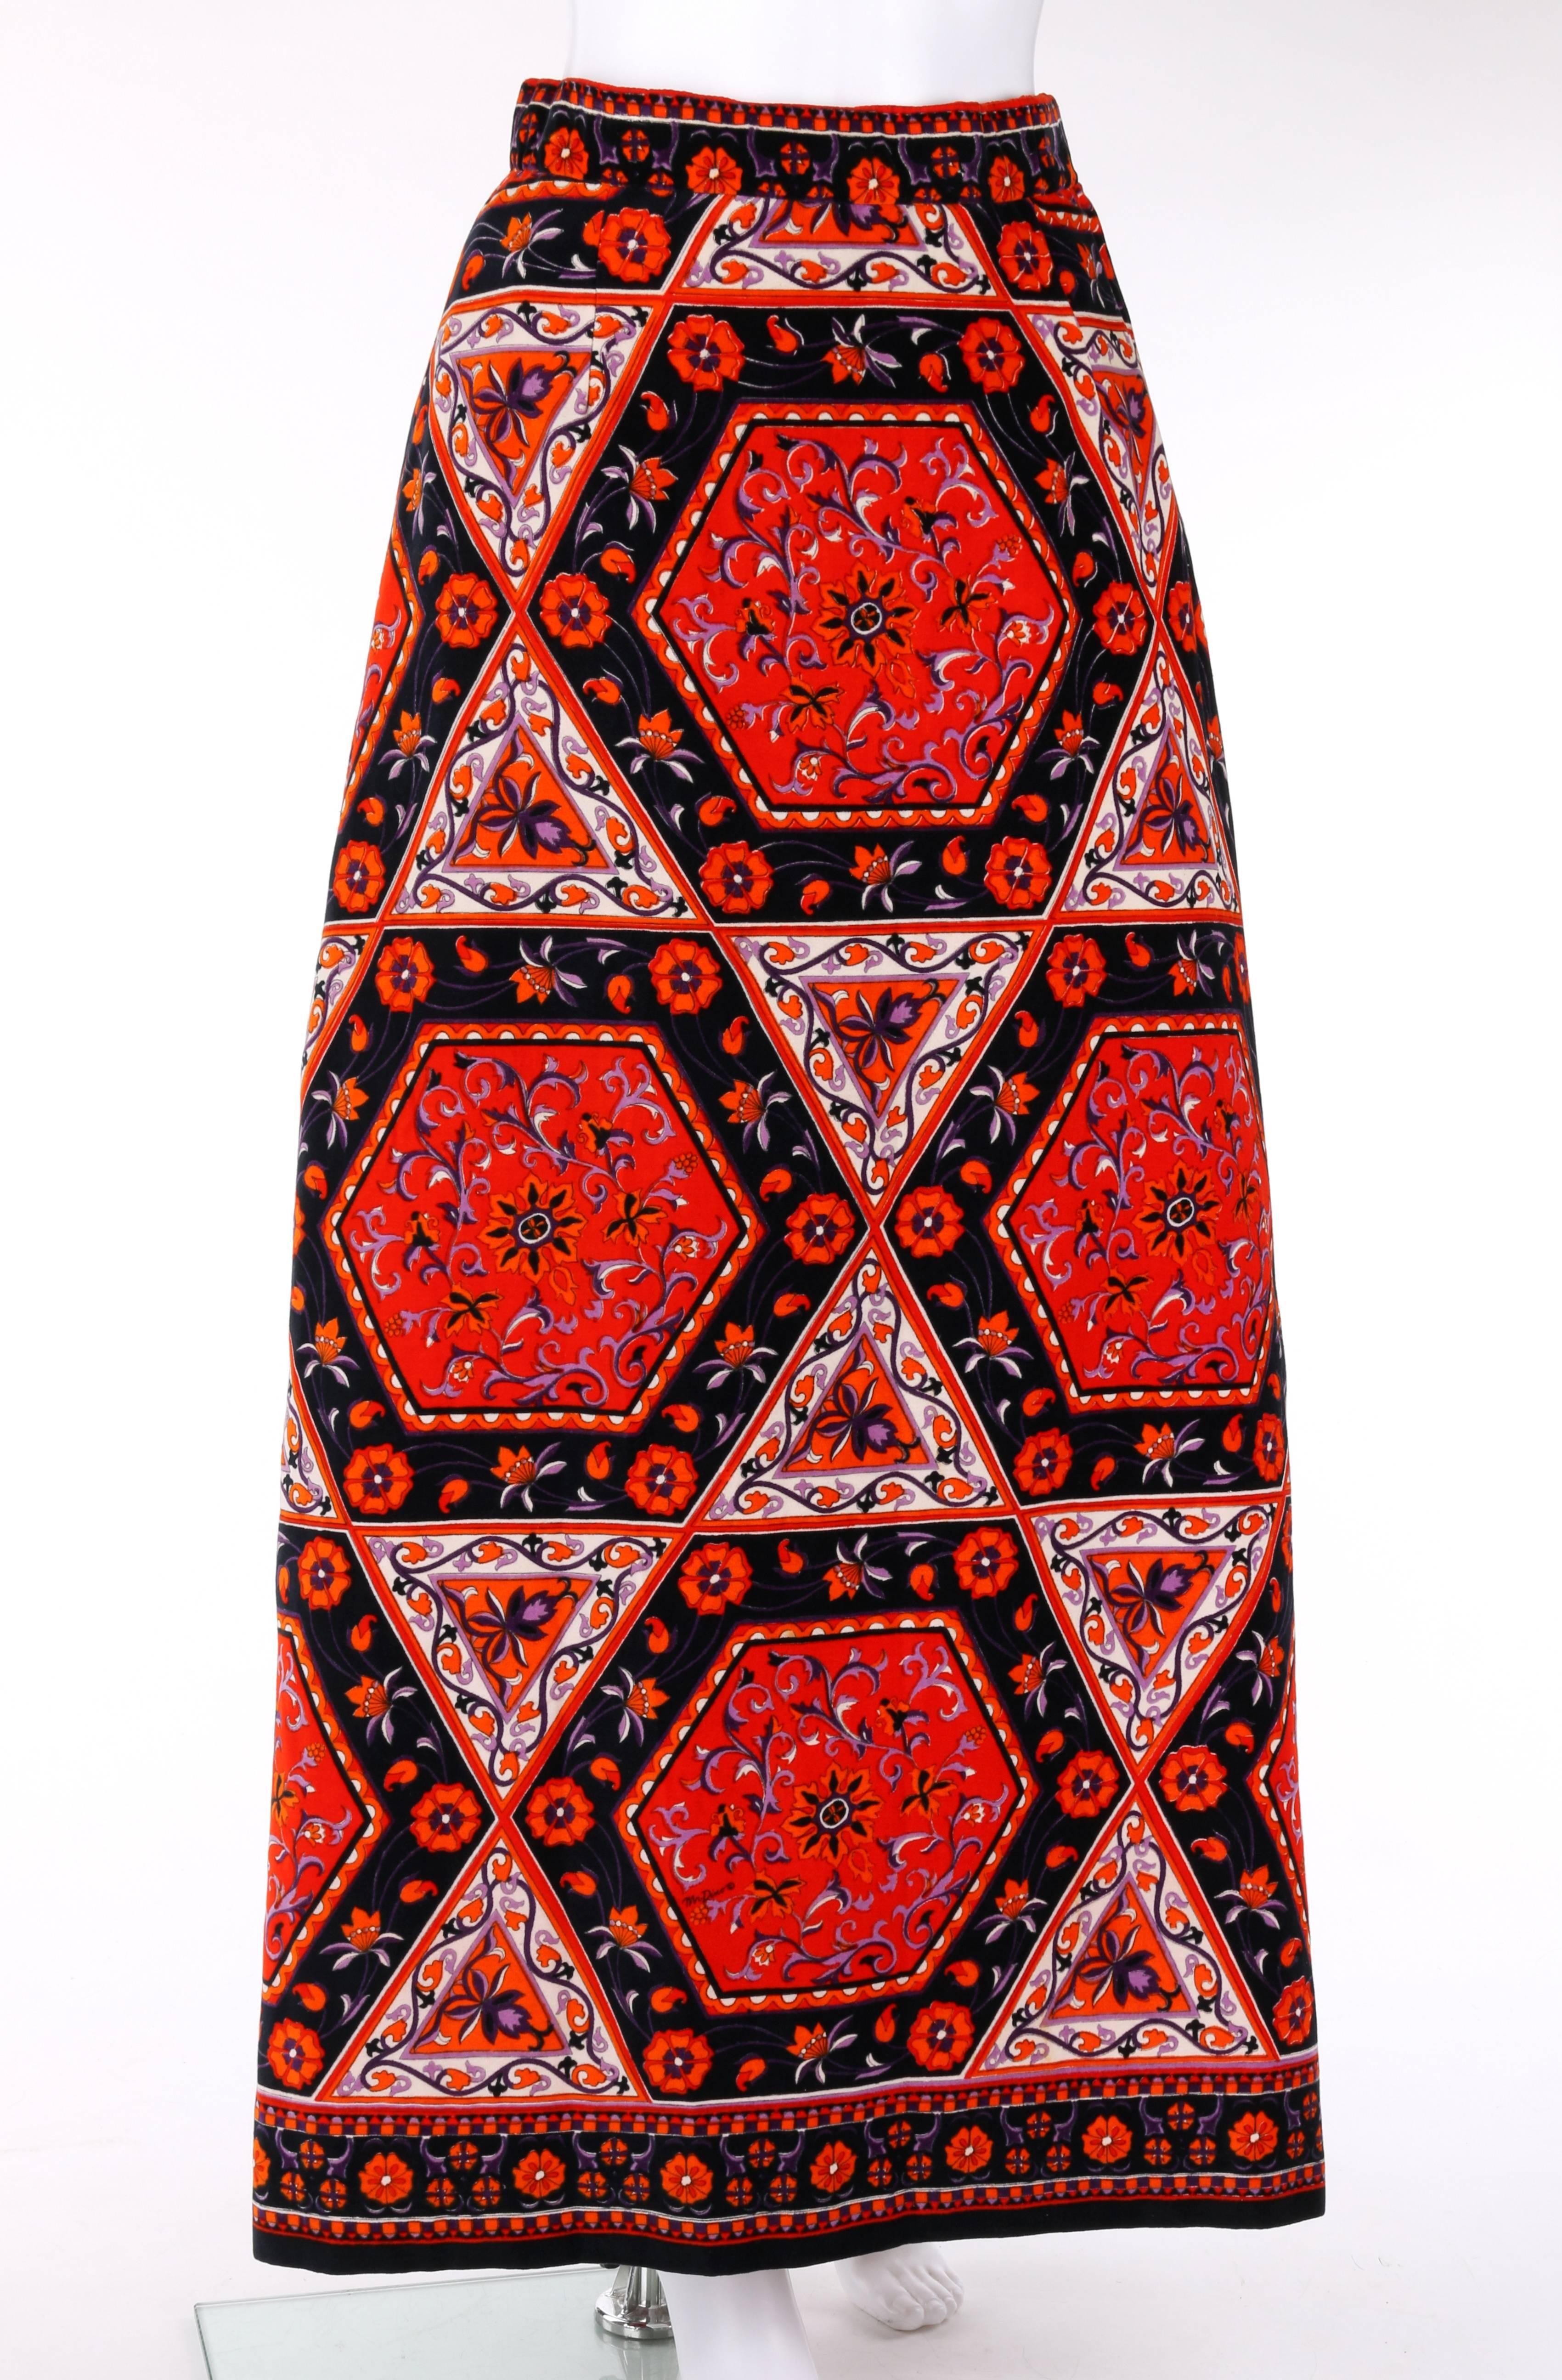 Vintage Mr. Dino c.1970's velvet print maxi skirt. Floral and geometric (hexagon and triangle) print in shades of red, orange, purple, and black. Left side seam slit. Side seam zipper and two hook and loop closures at top. Partially lined. Marked